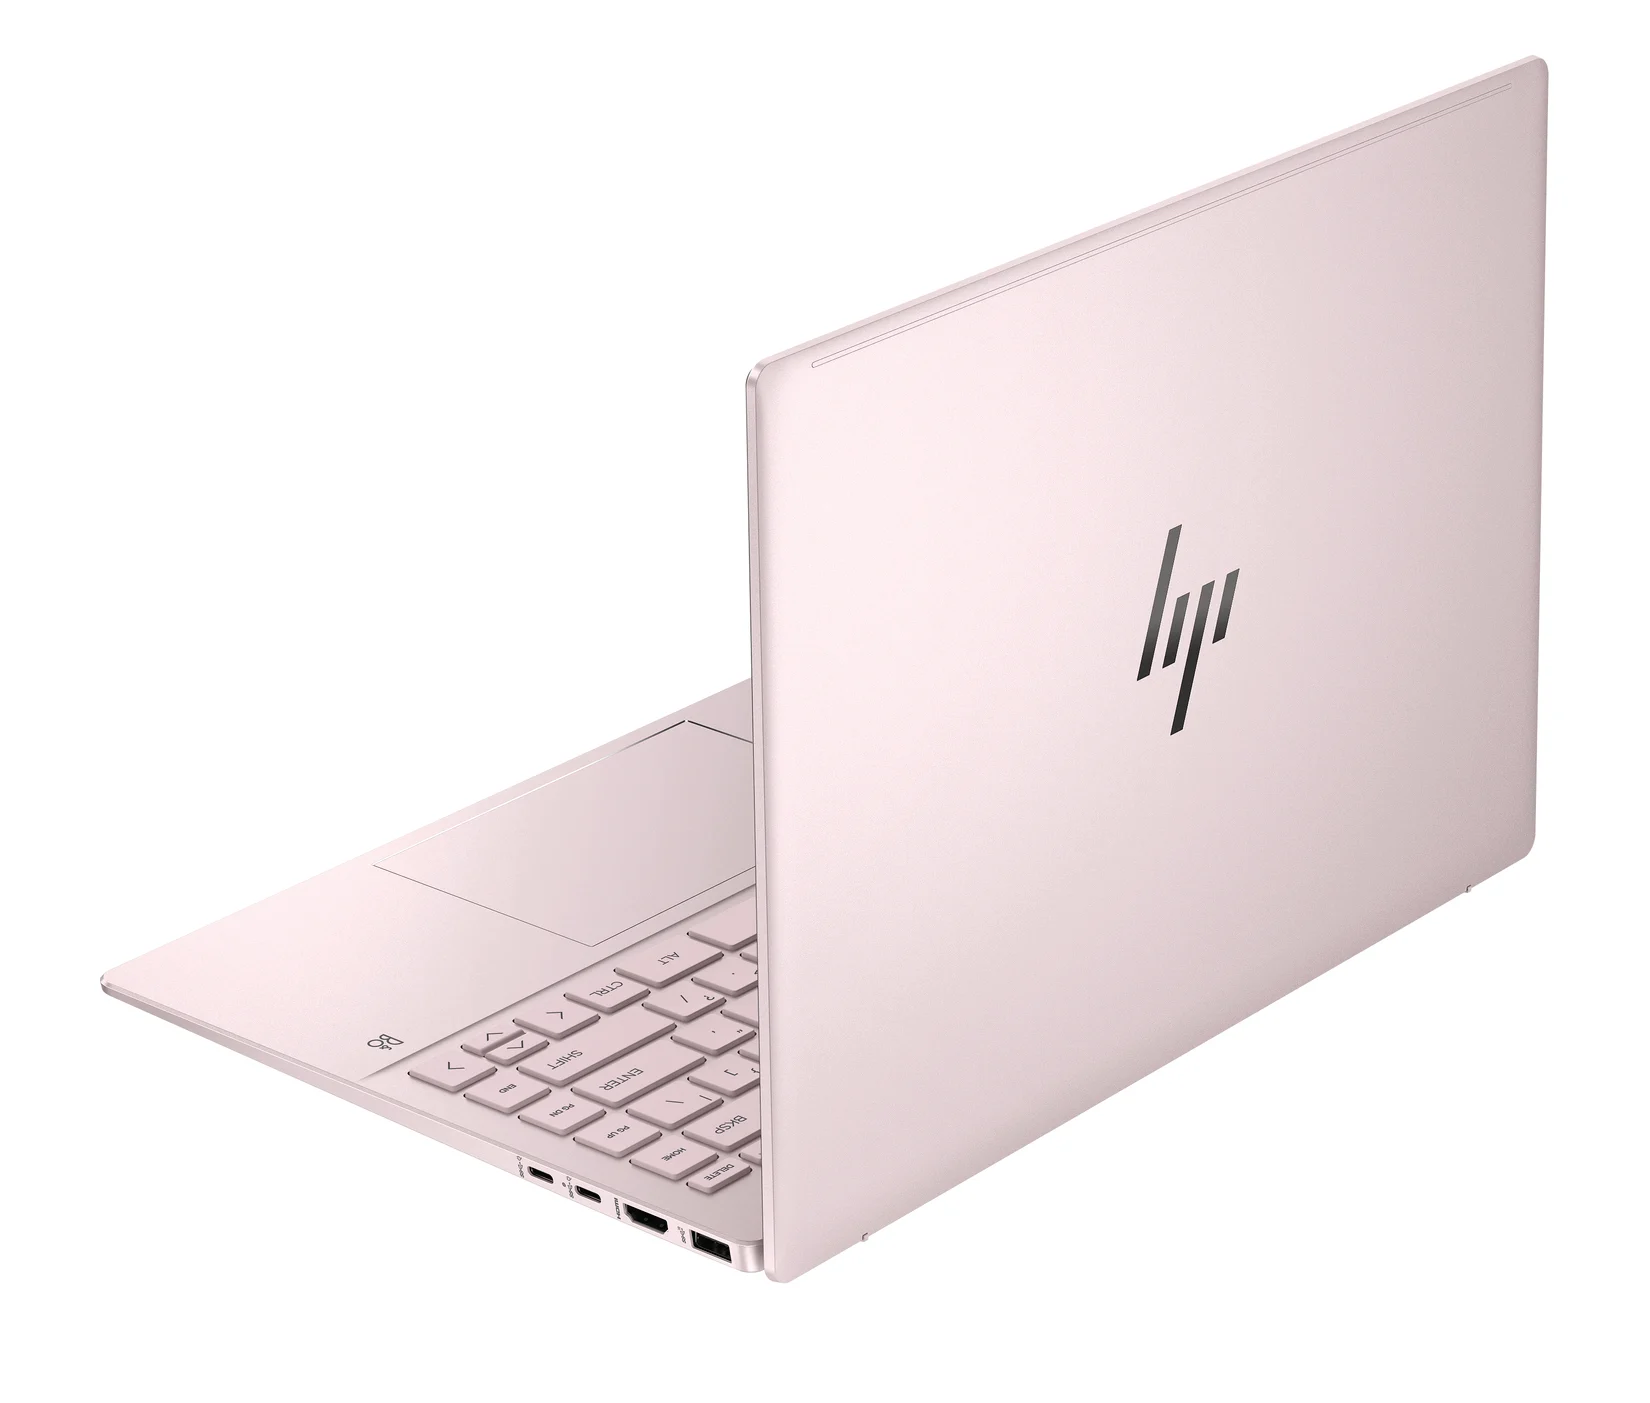 HP unveils the first 16-inch Pavilion Plus laptop with NVIDIA RTX graphics